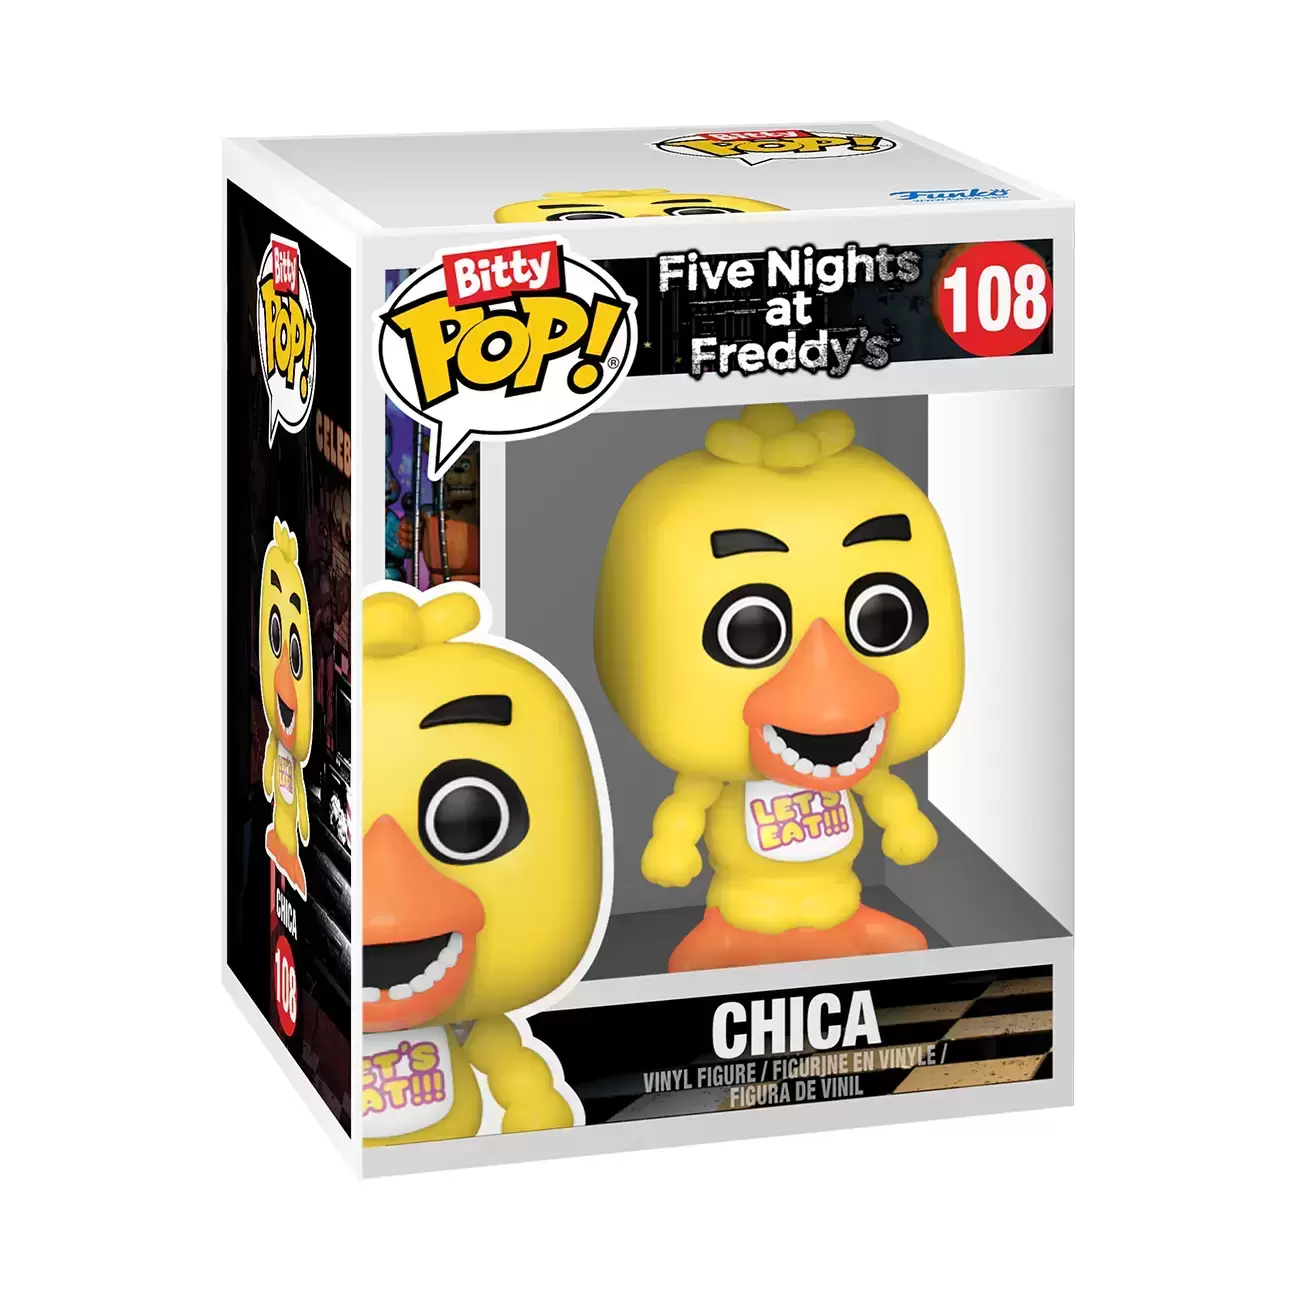 Five Nights At Freddy's - Chica - Bitty POP! action figure 108